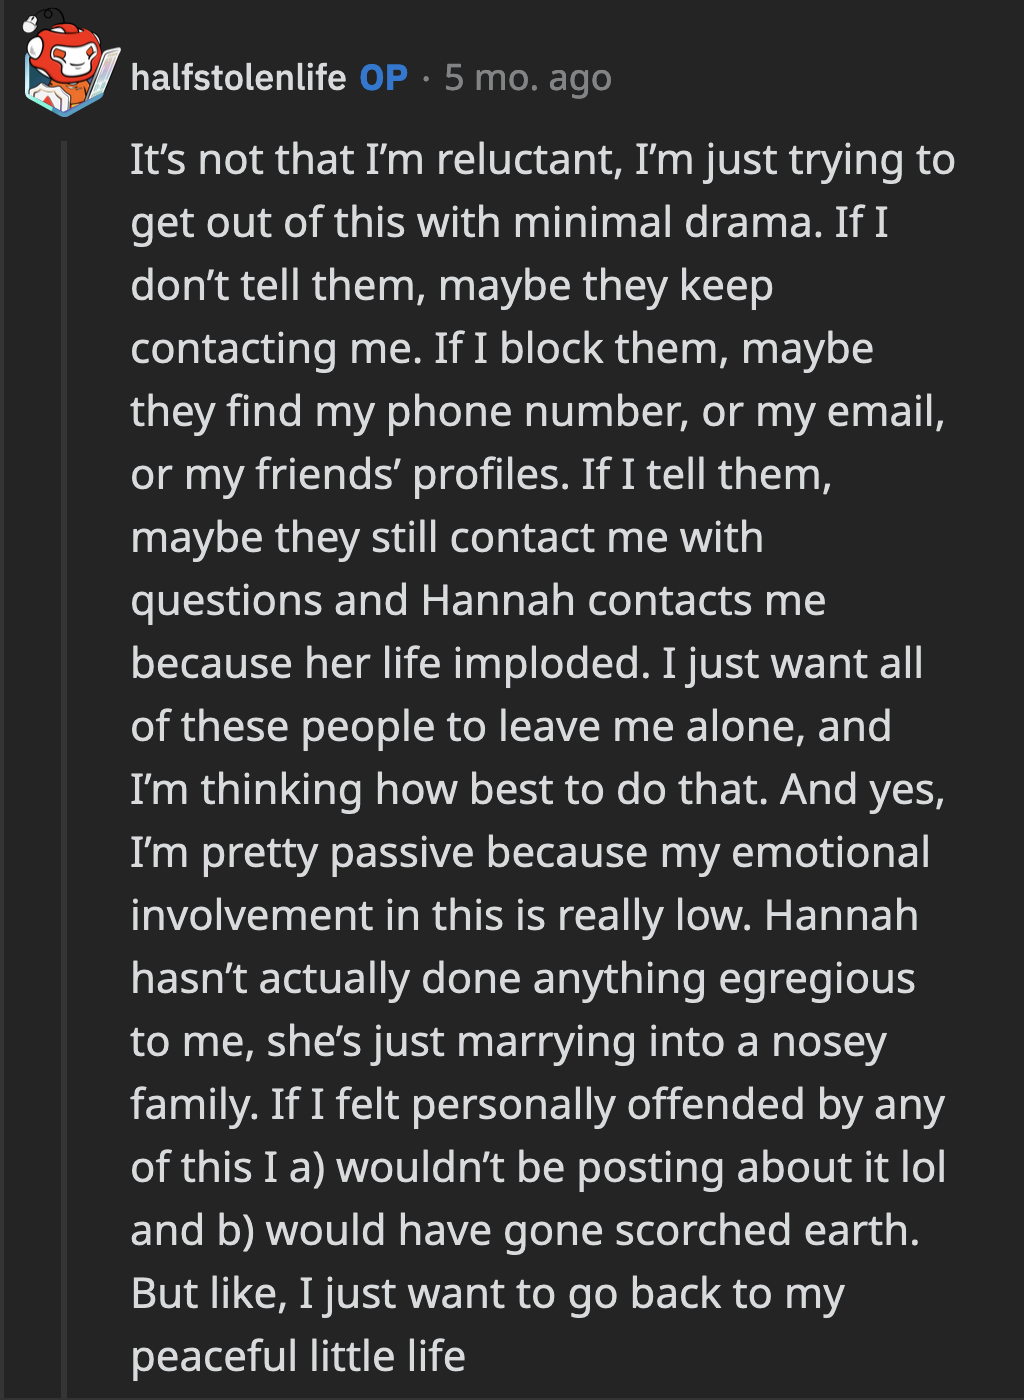 OP said she wasn't passive, she just didn't have an emotional stake in the situation. Besides, she wanted to find the least dramatic solution to an issue that shouldn't have involved her in the first place.